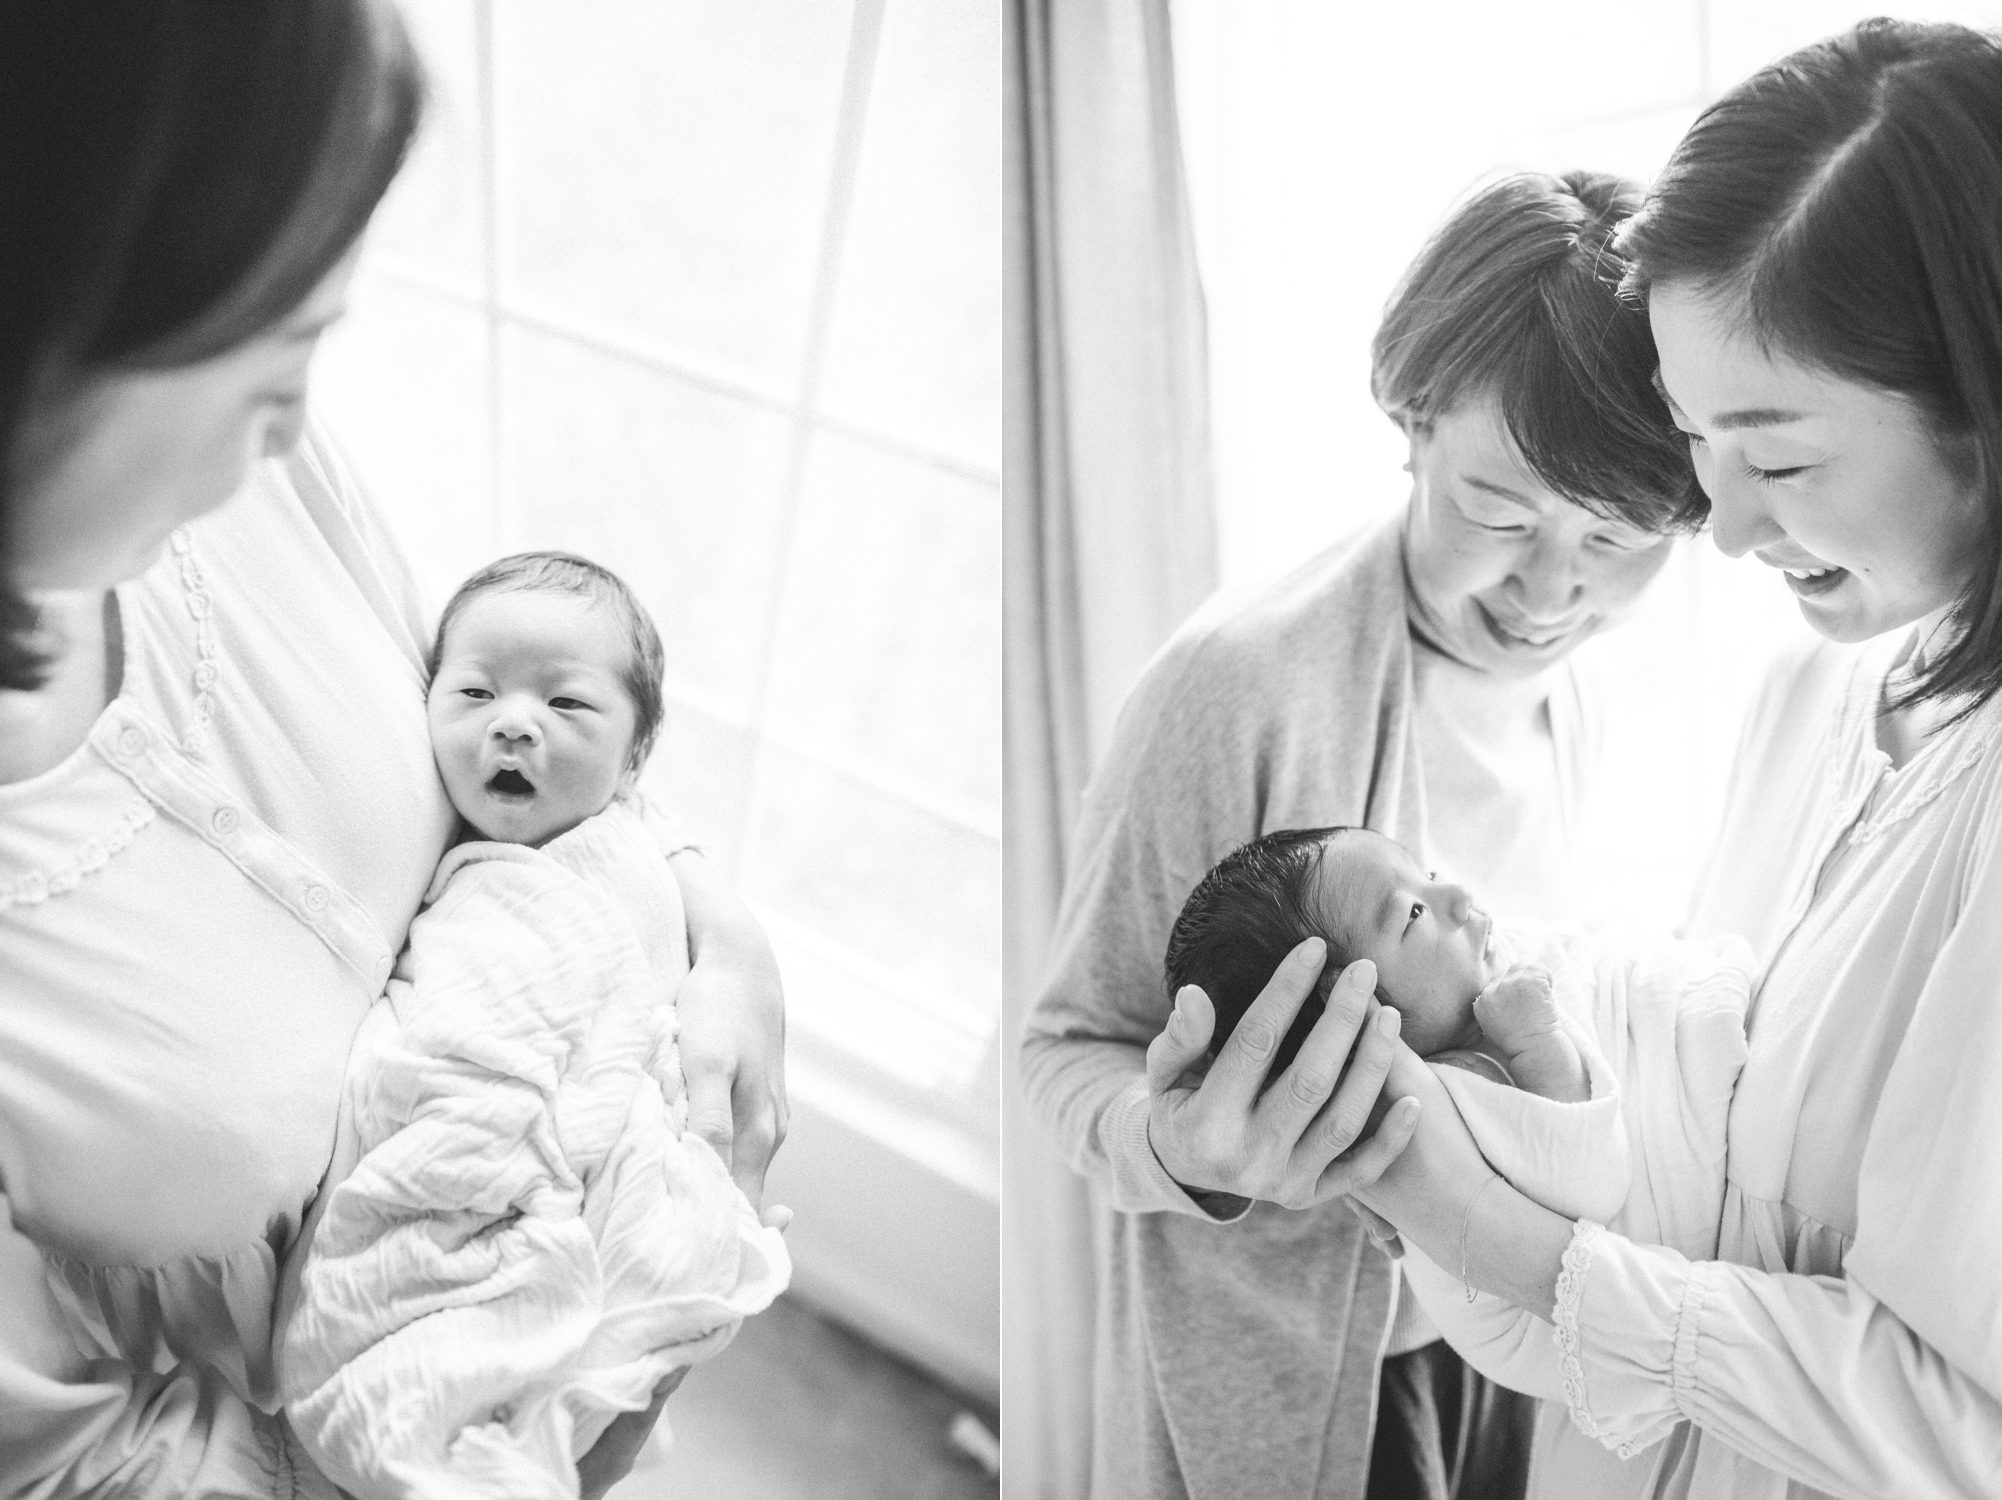 Mom and Grandma holding newborn baby during photo shoot. Black and white photos by LRG Portraits.